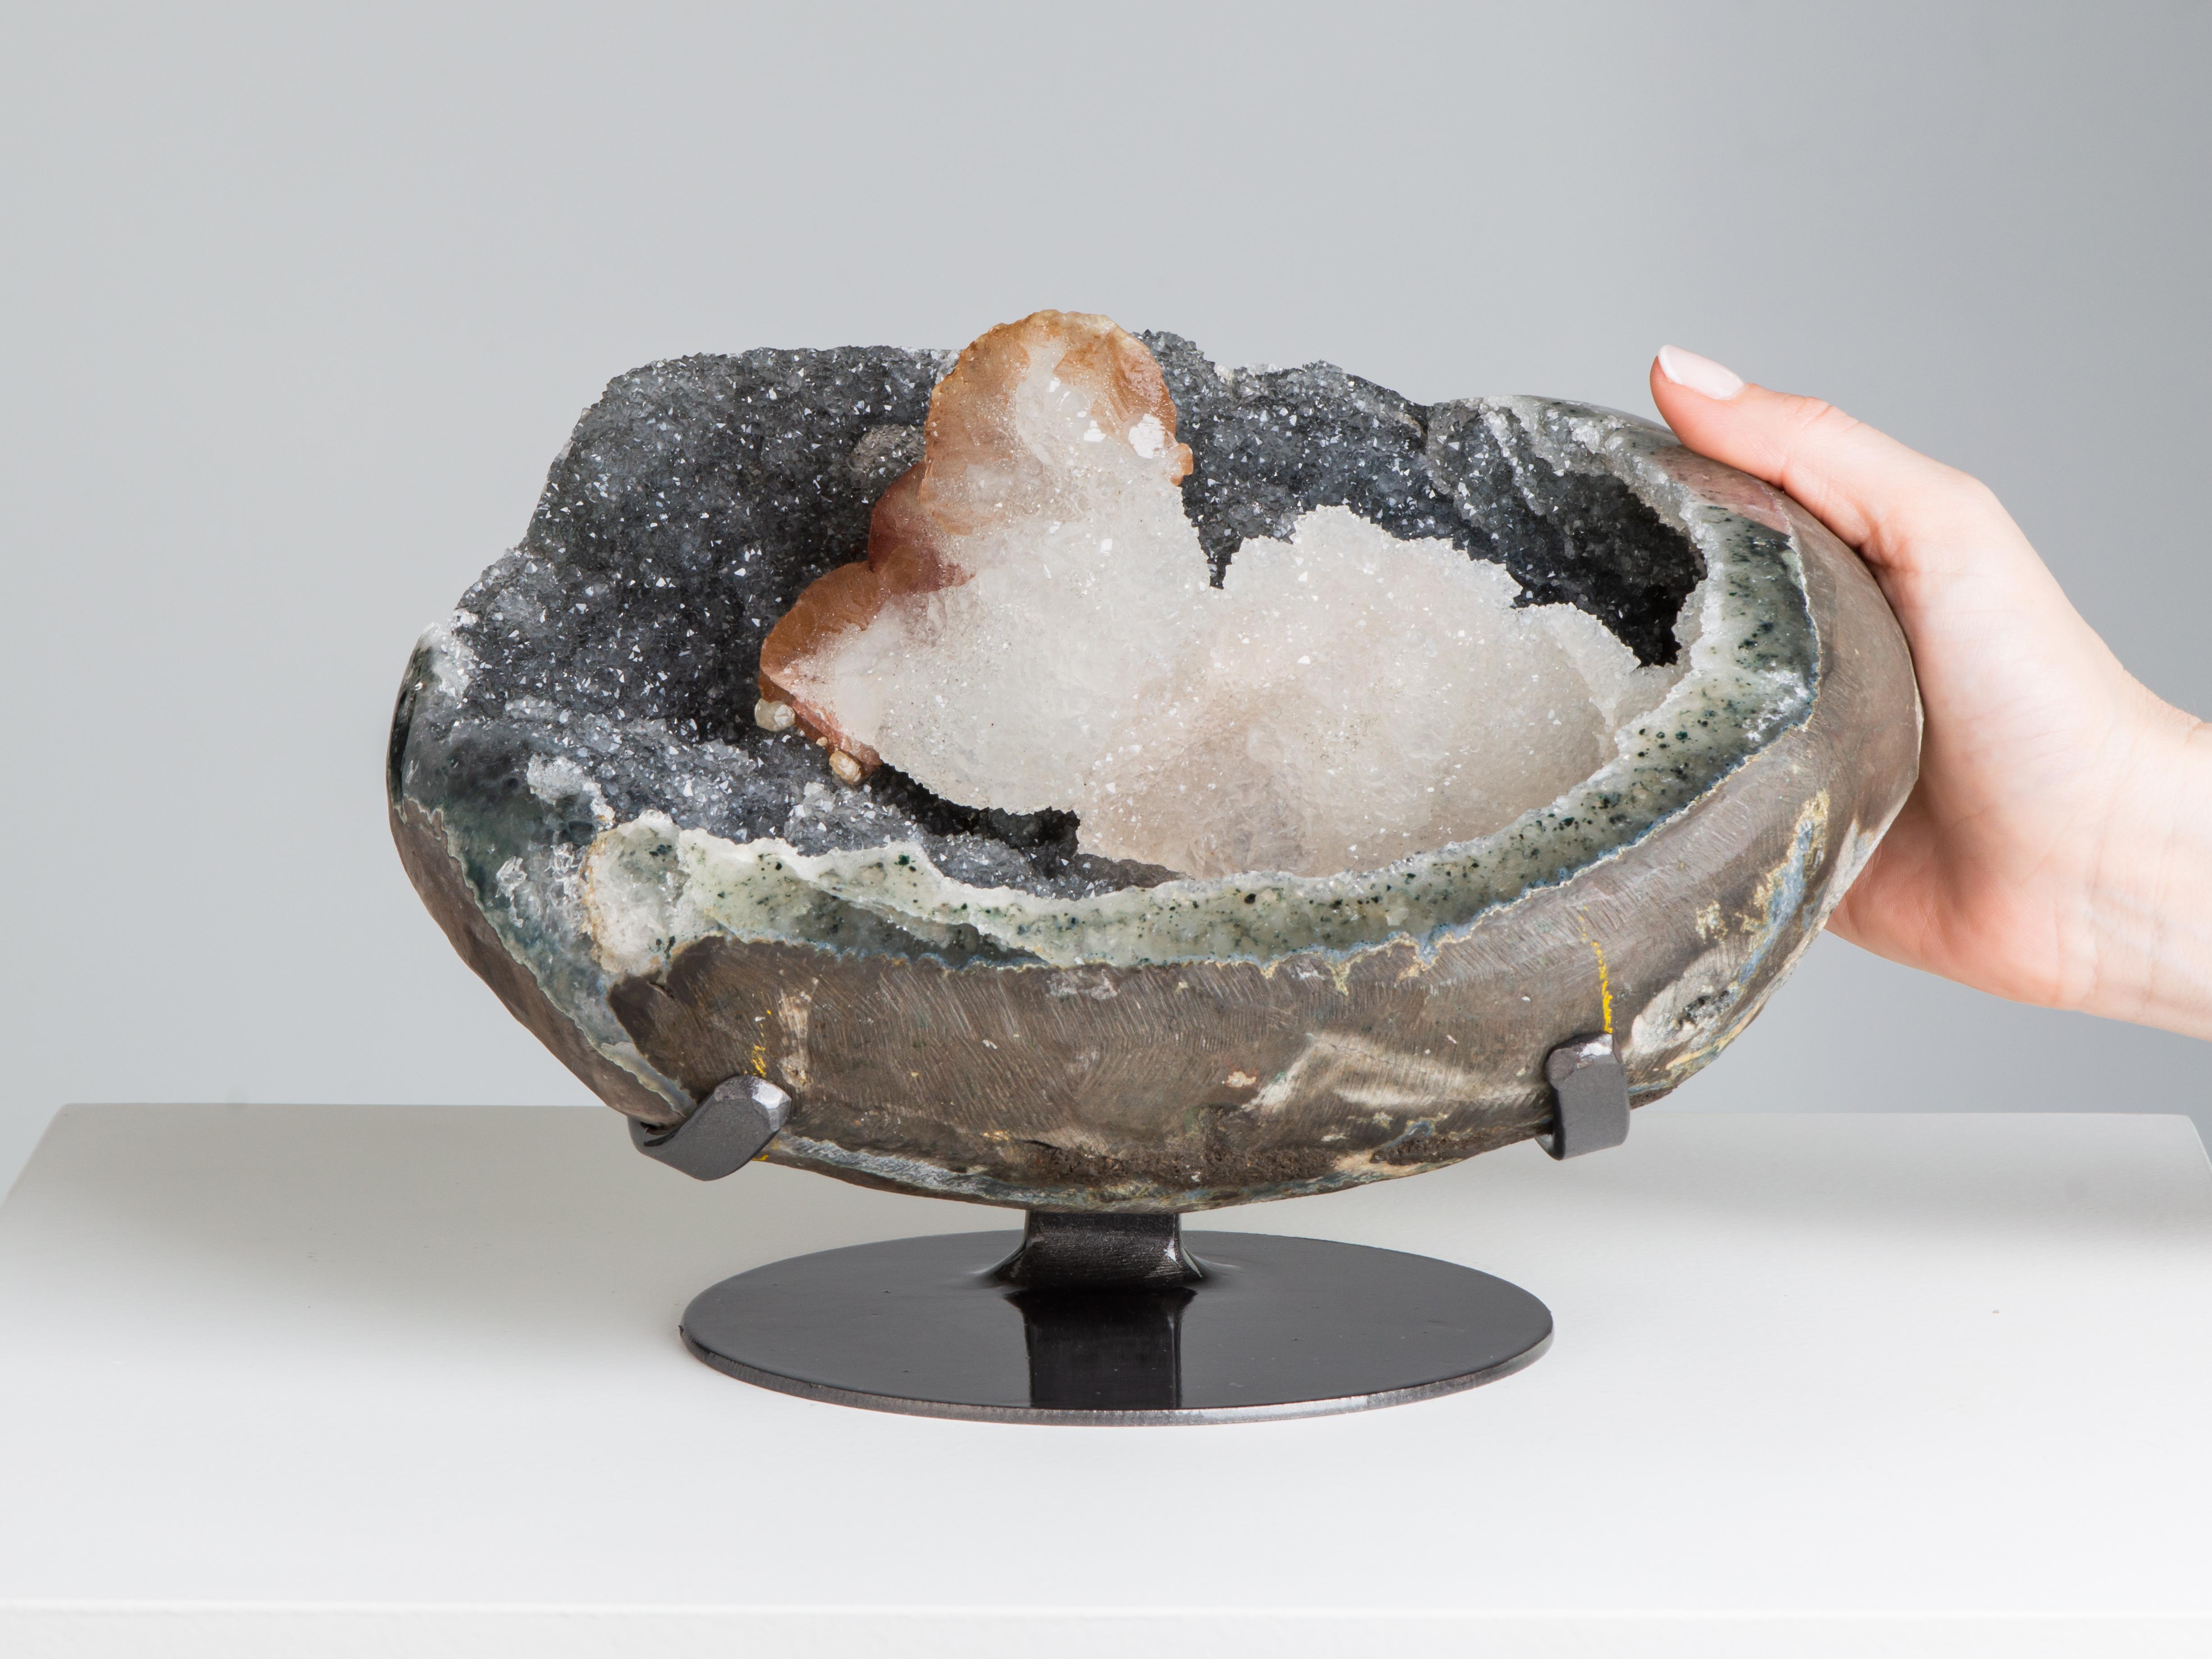 A wonderful largely complete geode lined with steel coloured druzy quartz and a large central calcite covered in white druze, resembling a bellowing smoke cloud. To the side the flame like underlying calcite can be seen.

Dimensions of stone : H